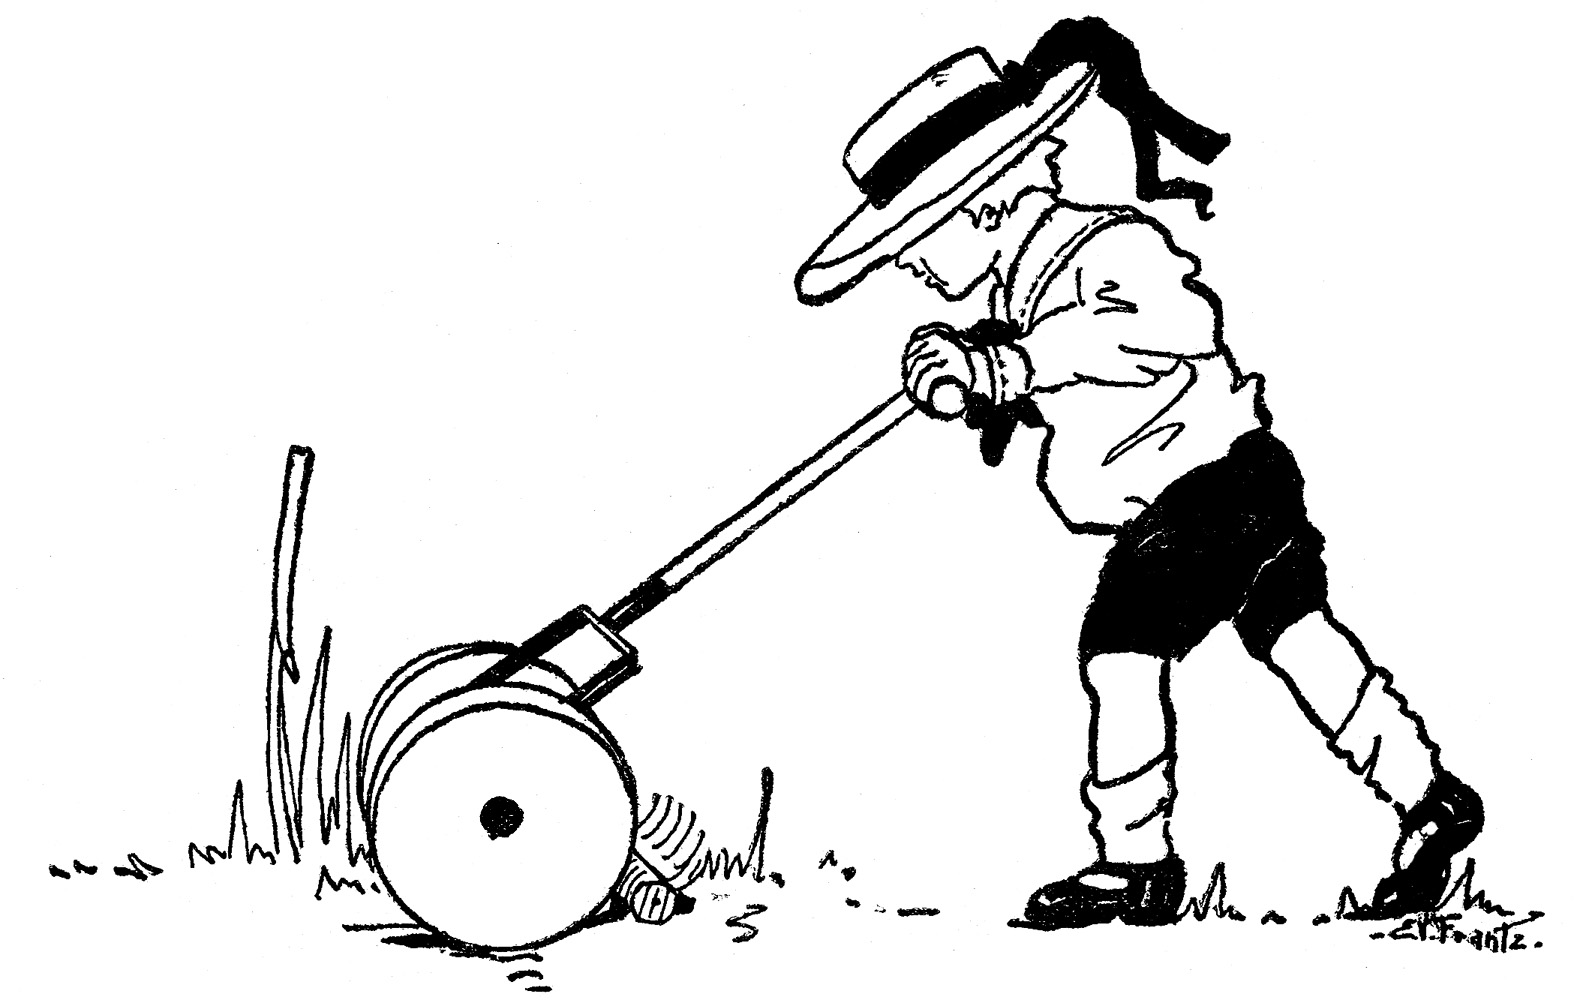 Vintage Summer Clip Art - Boy with Lawn Mower - The Graphics Fairy